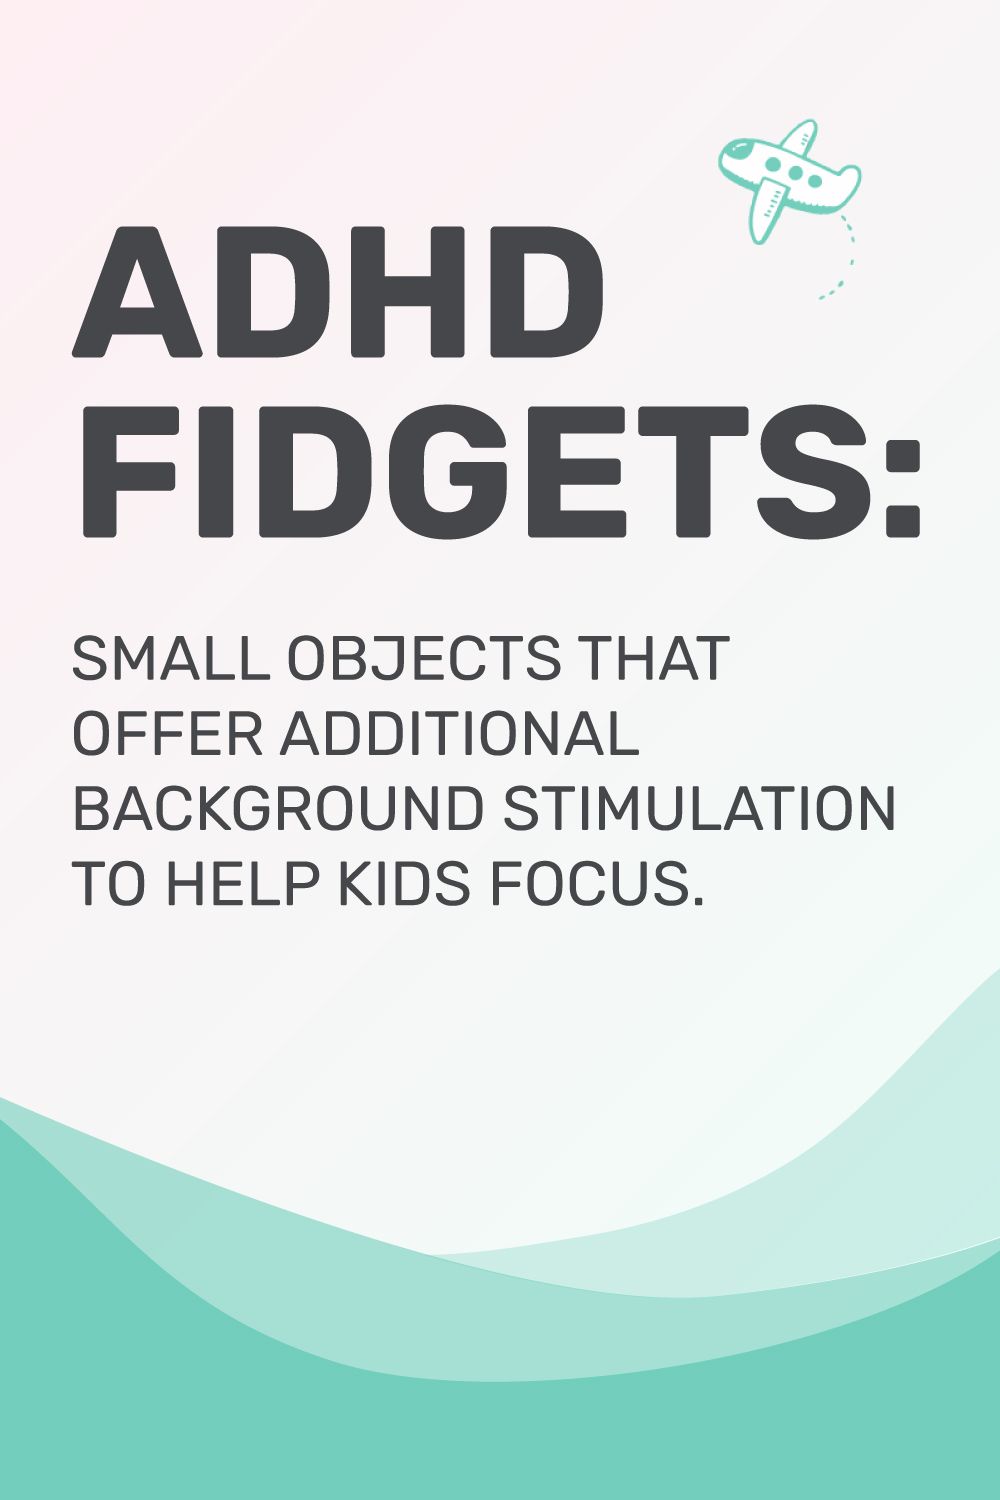 6 types of fun fidgets for kids with ADHD